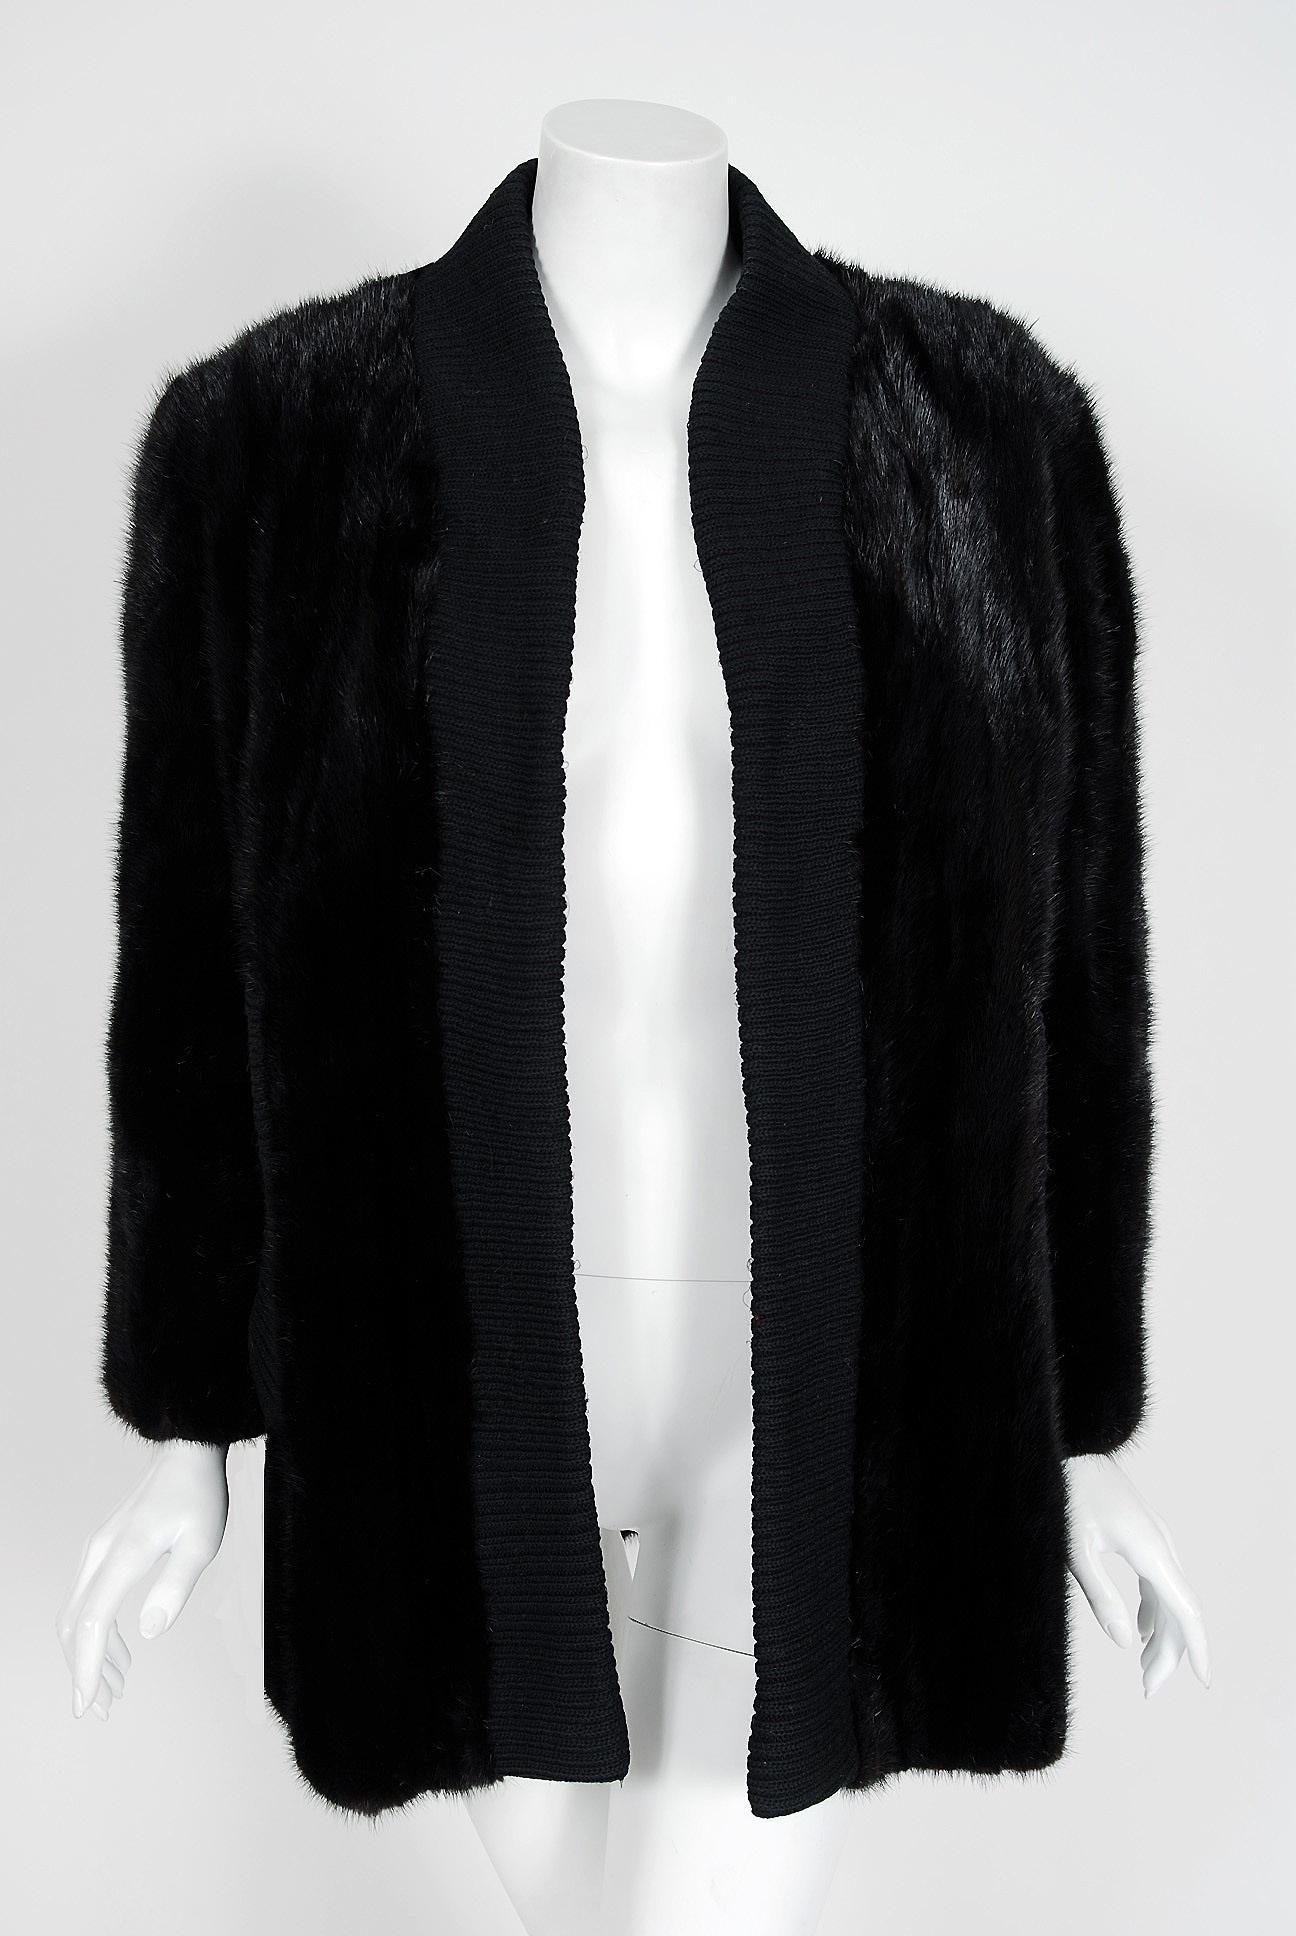 This exquisite 1968 Pierre Cardin Couture genuine mink-fur and wool knit cardigan will make any woman shine during the upcoming colder months. The soft dark mink been worked into vertical panels and the effect is really breathtaking. The care to